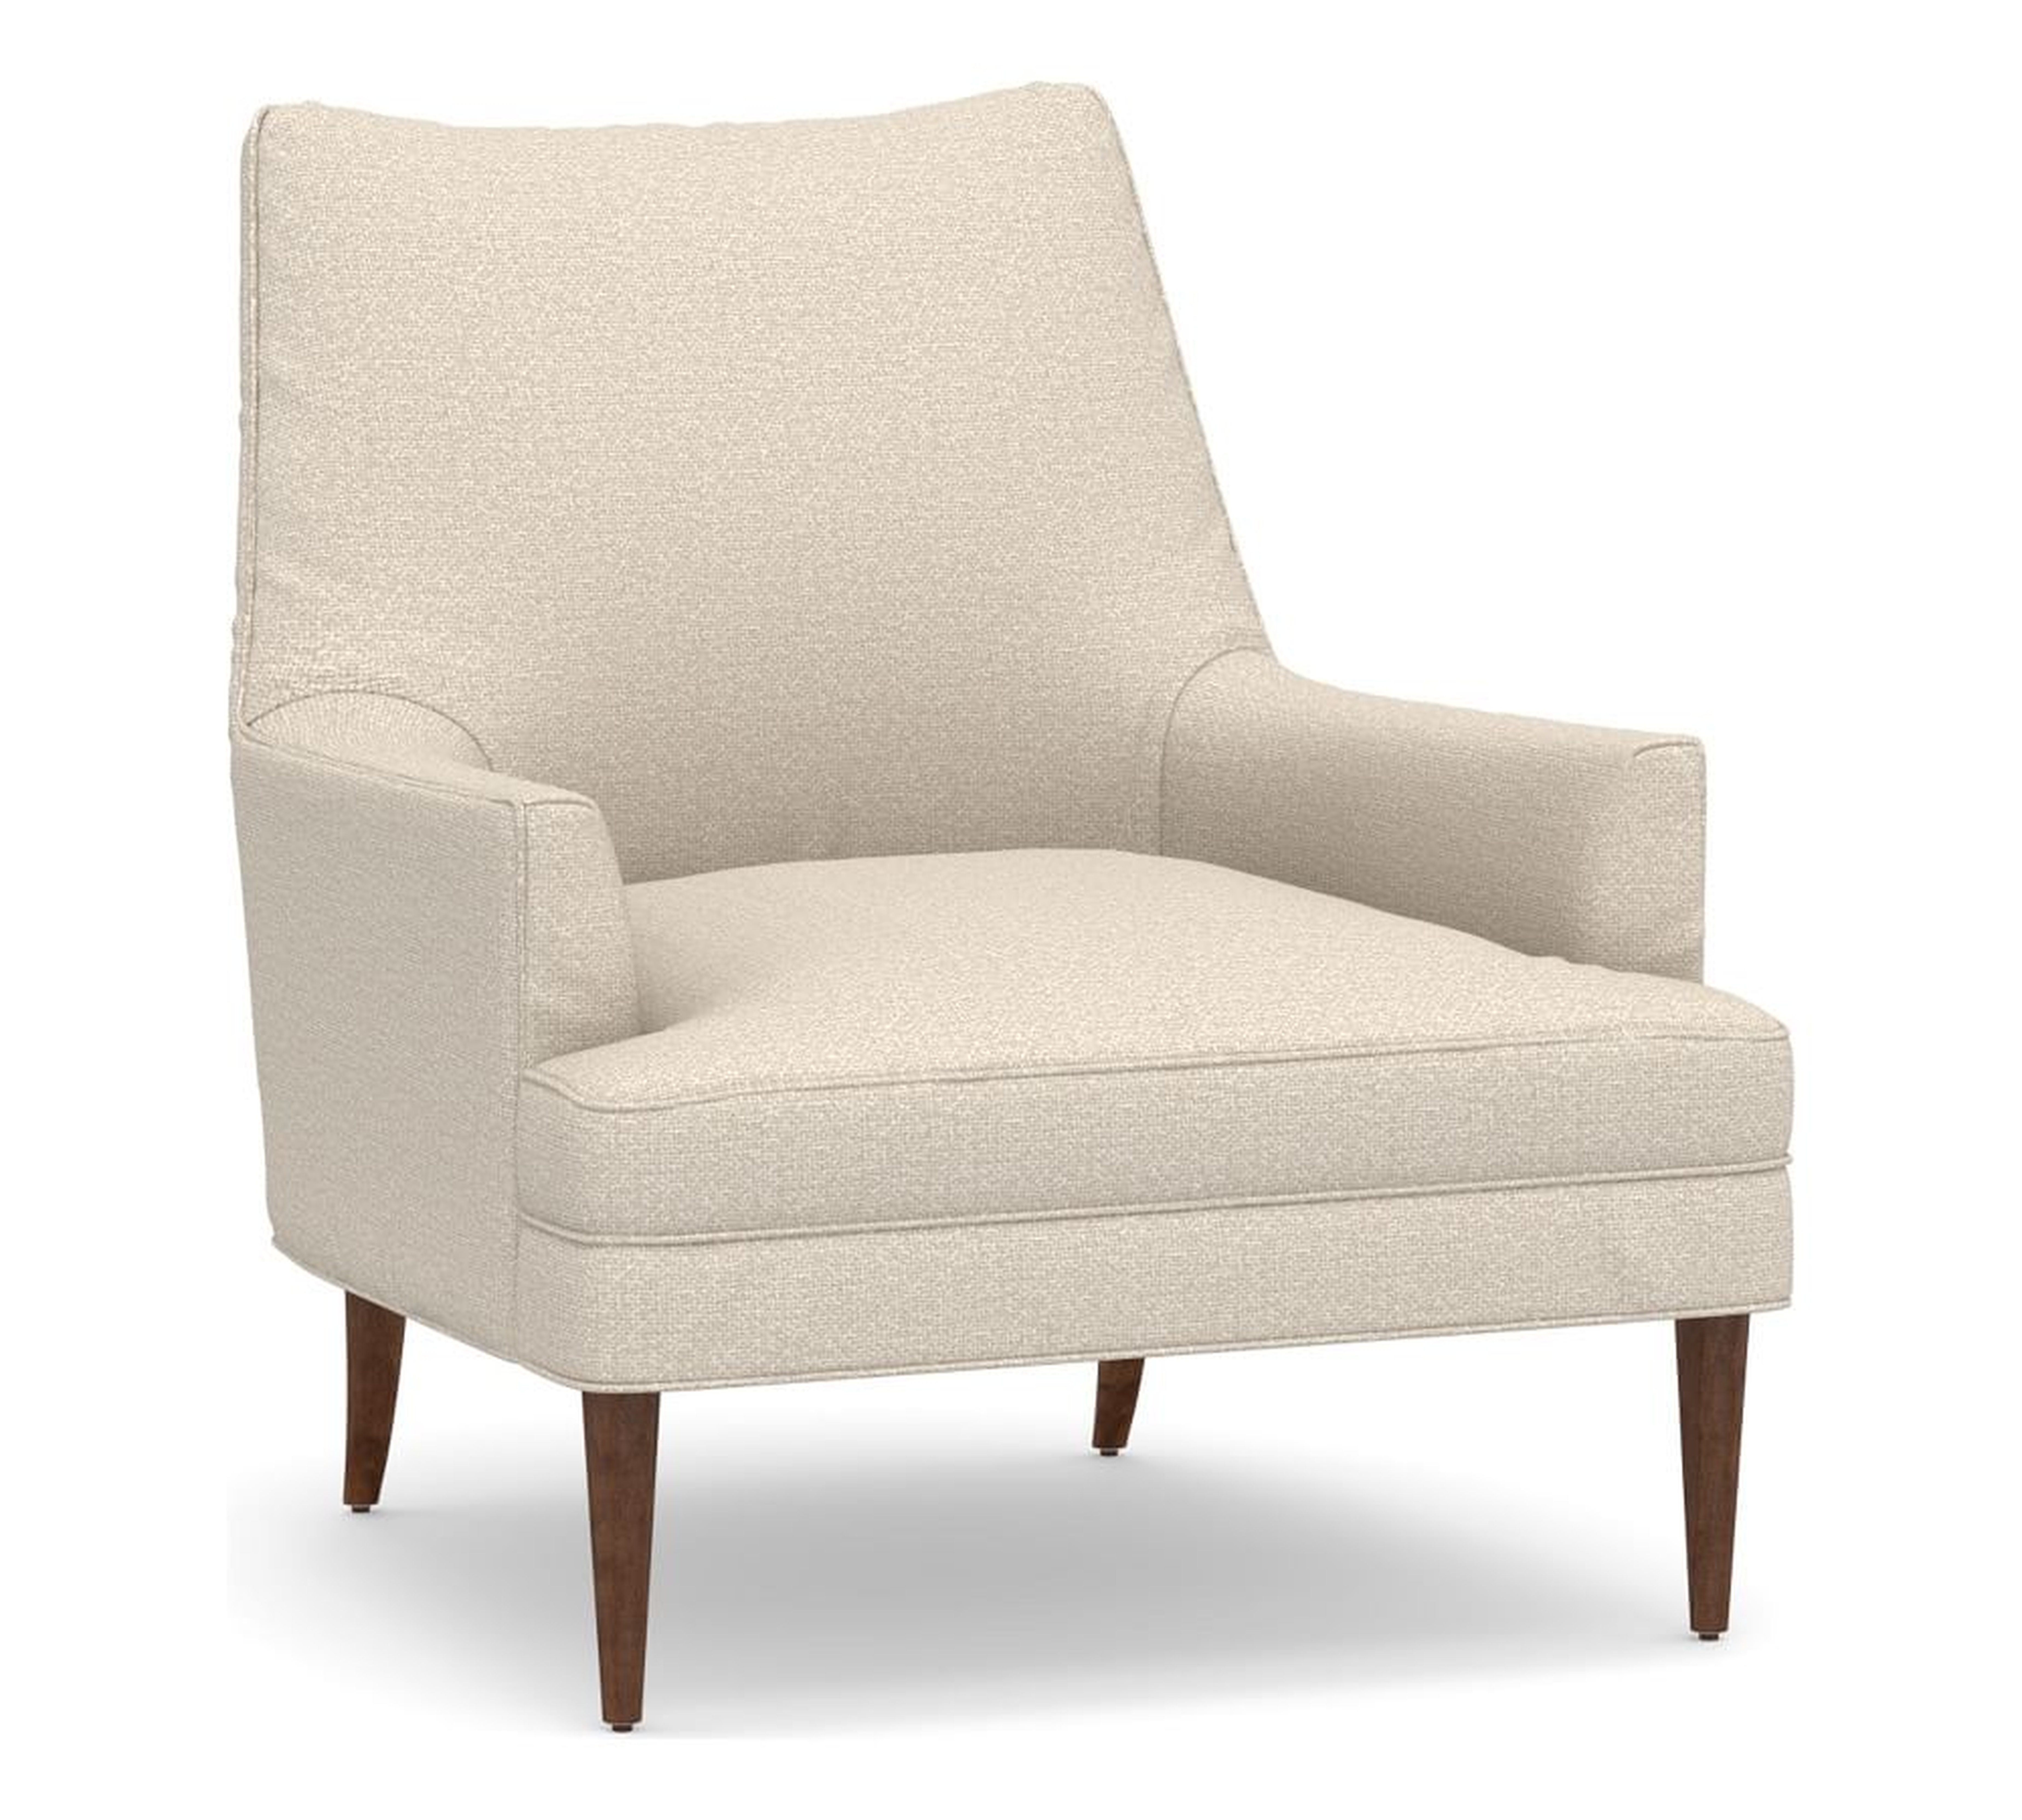 Reyes Upholstered Armchair, Polyester Wrapped Cushions, Performance Chateau Basketweave Oatmeal - Pottery Barn